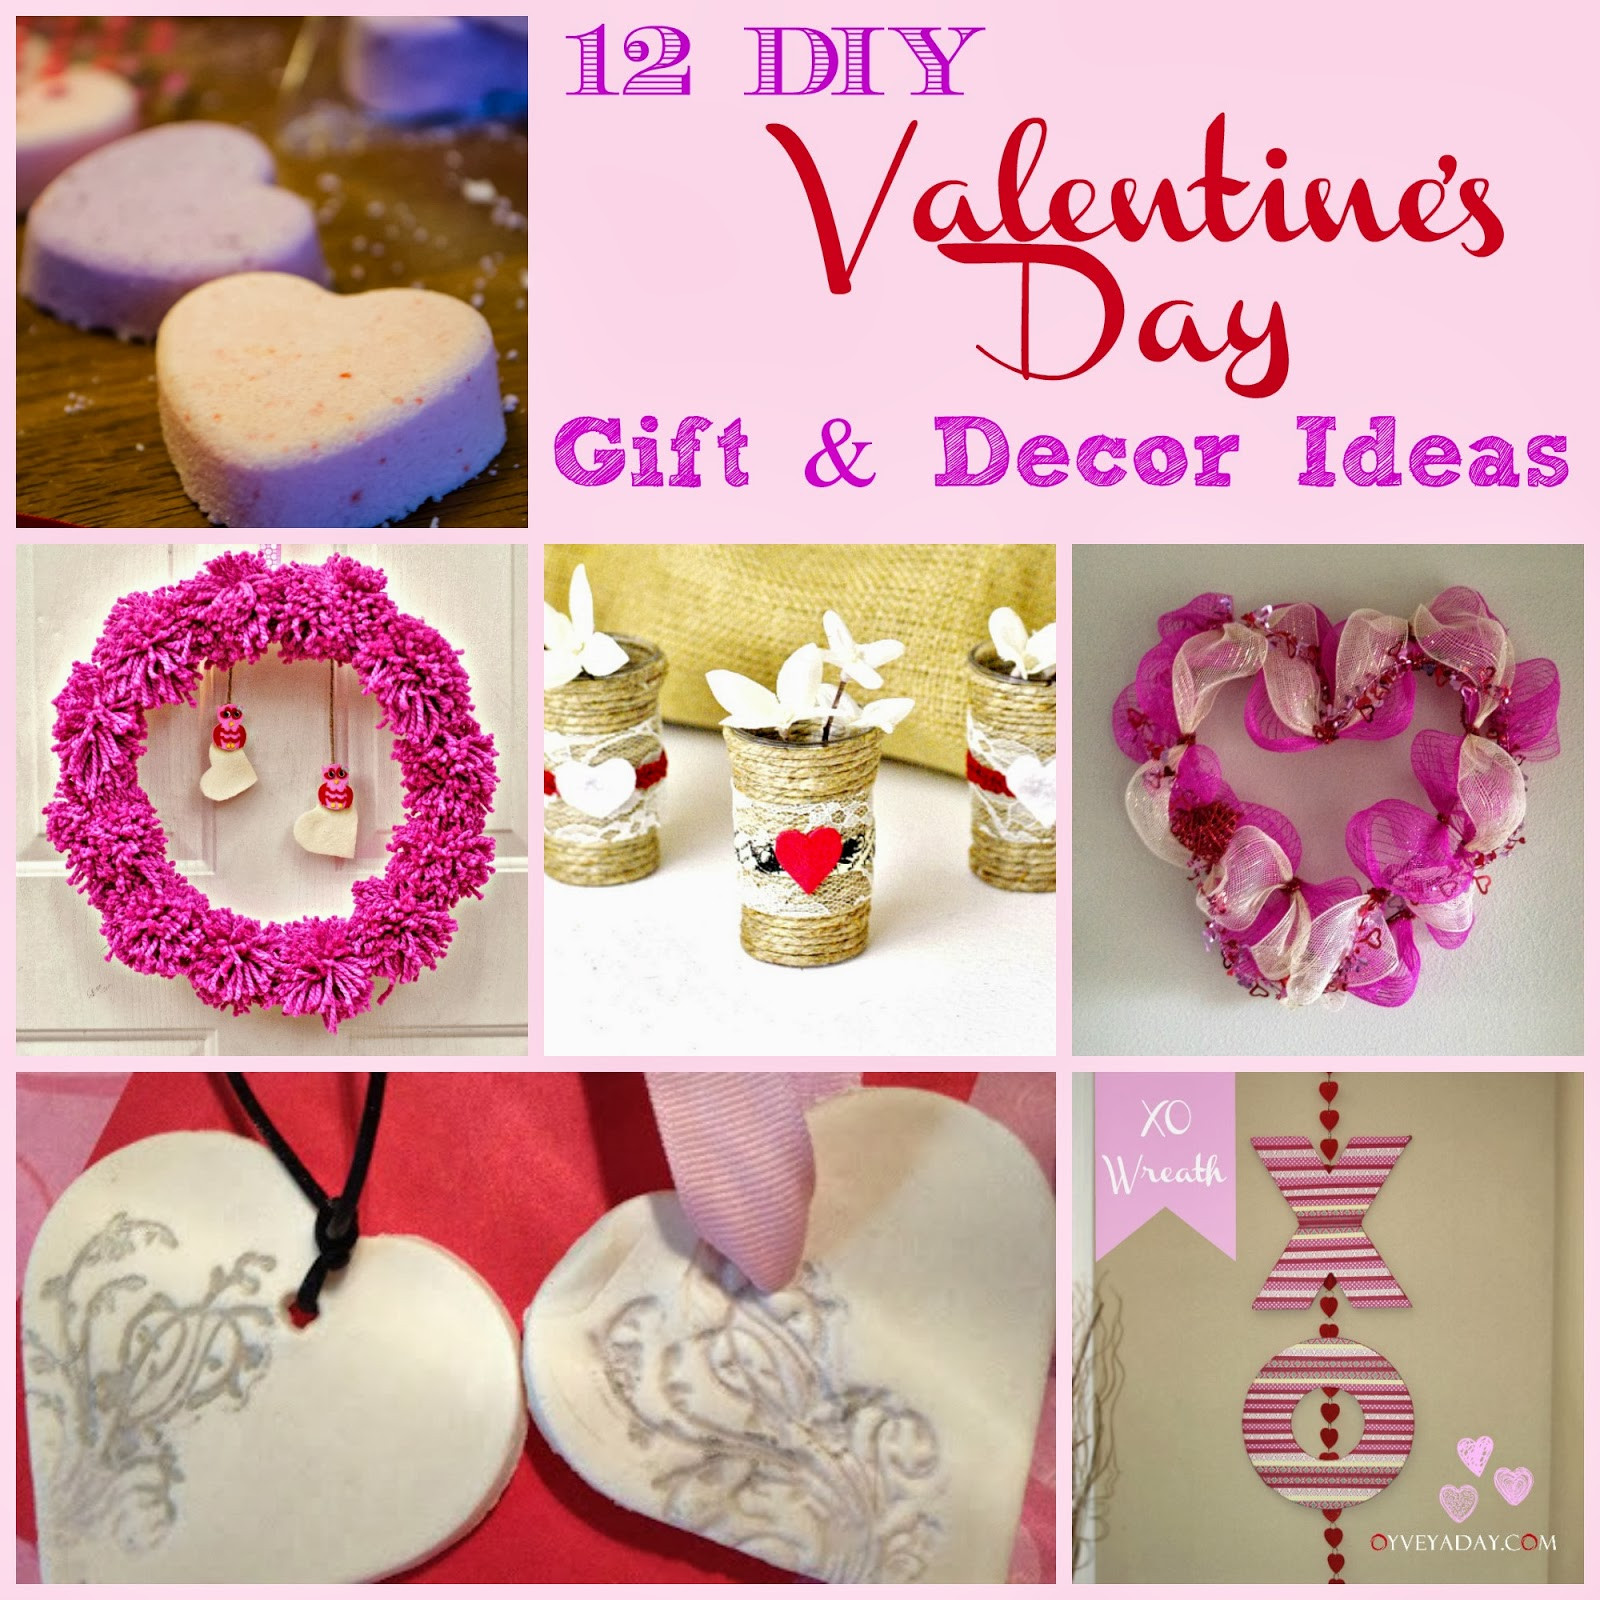 Valentines Day Diy Gift
 12 DIY Valentine s Day Gift & Decor Ideas Outnumbered 3 to 1